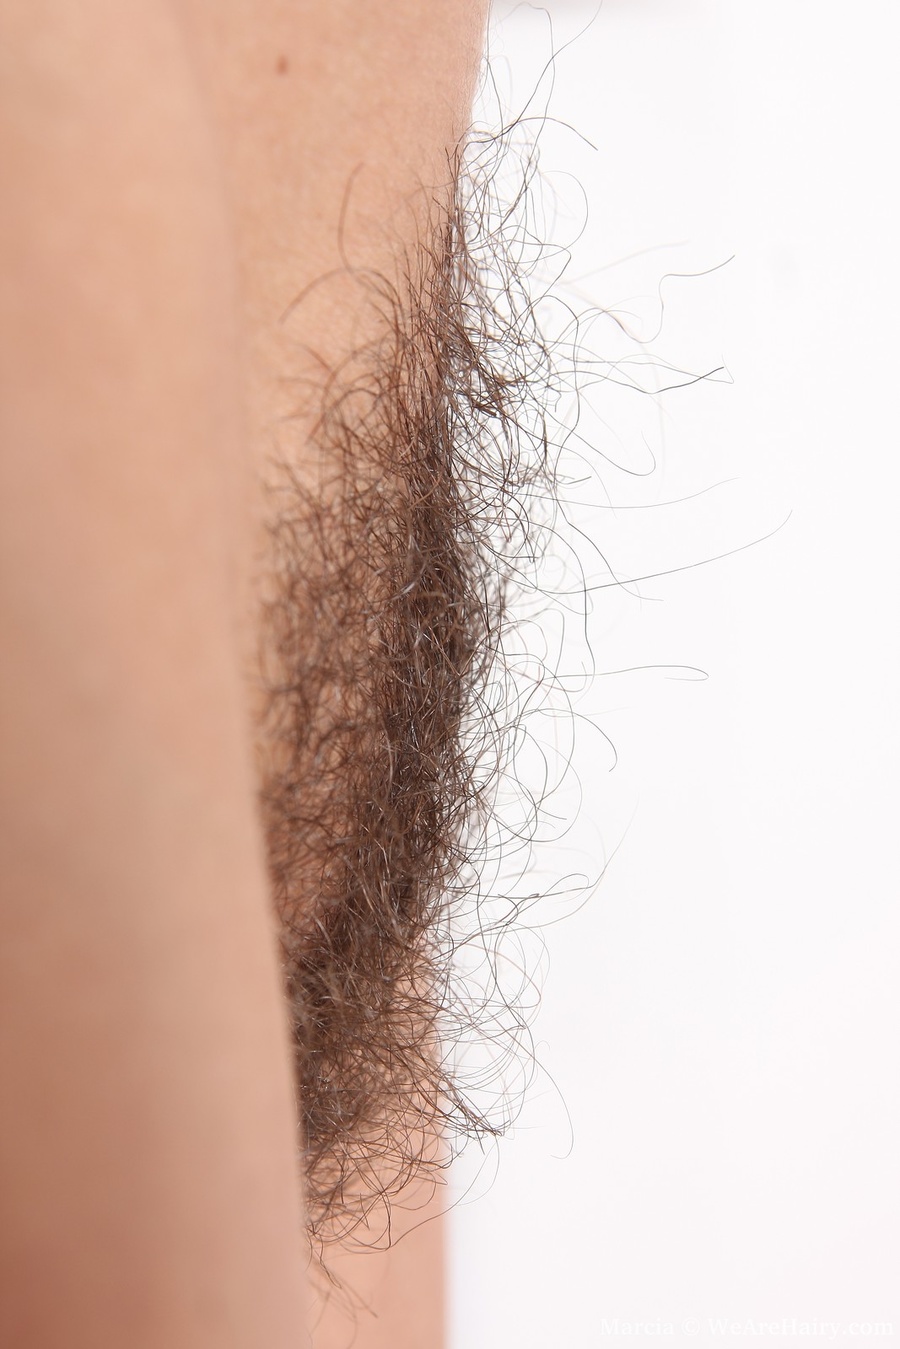 Sexy hairy. Sit back and relax as the stunn - XXX Dessert - Picture 9